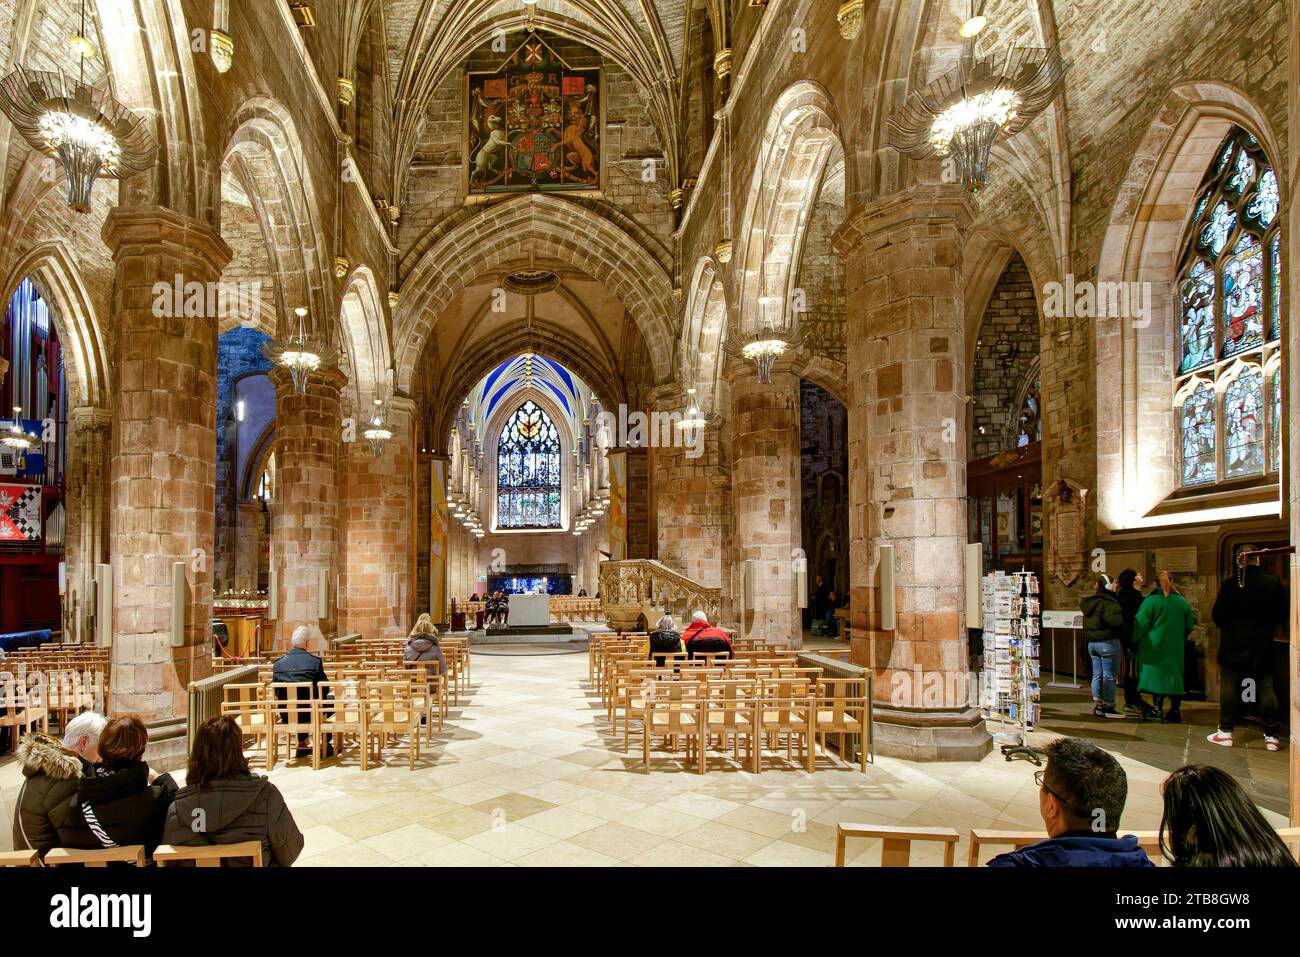 St Giles' Cathedral Old Town Edinburgh interior looking towards the white marble communion table Stock Photo